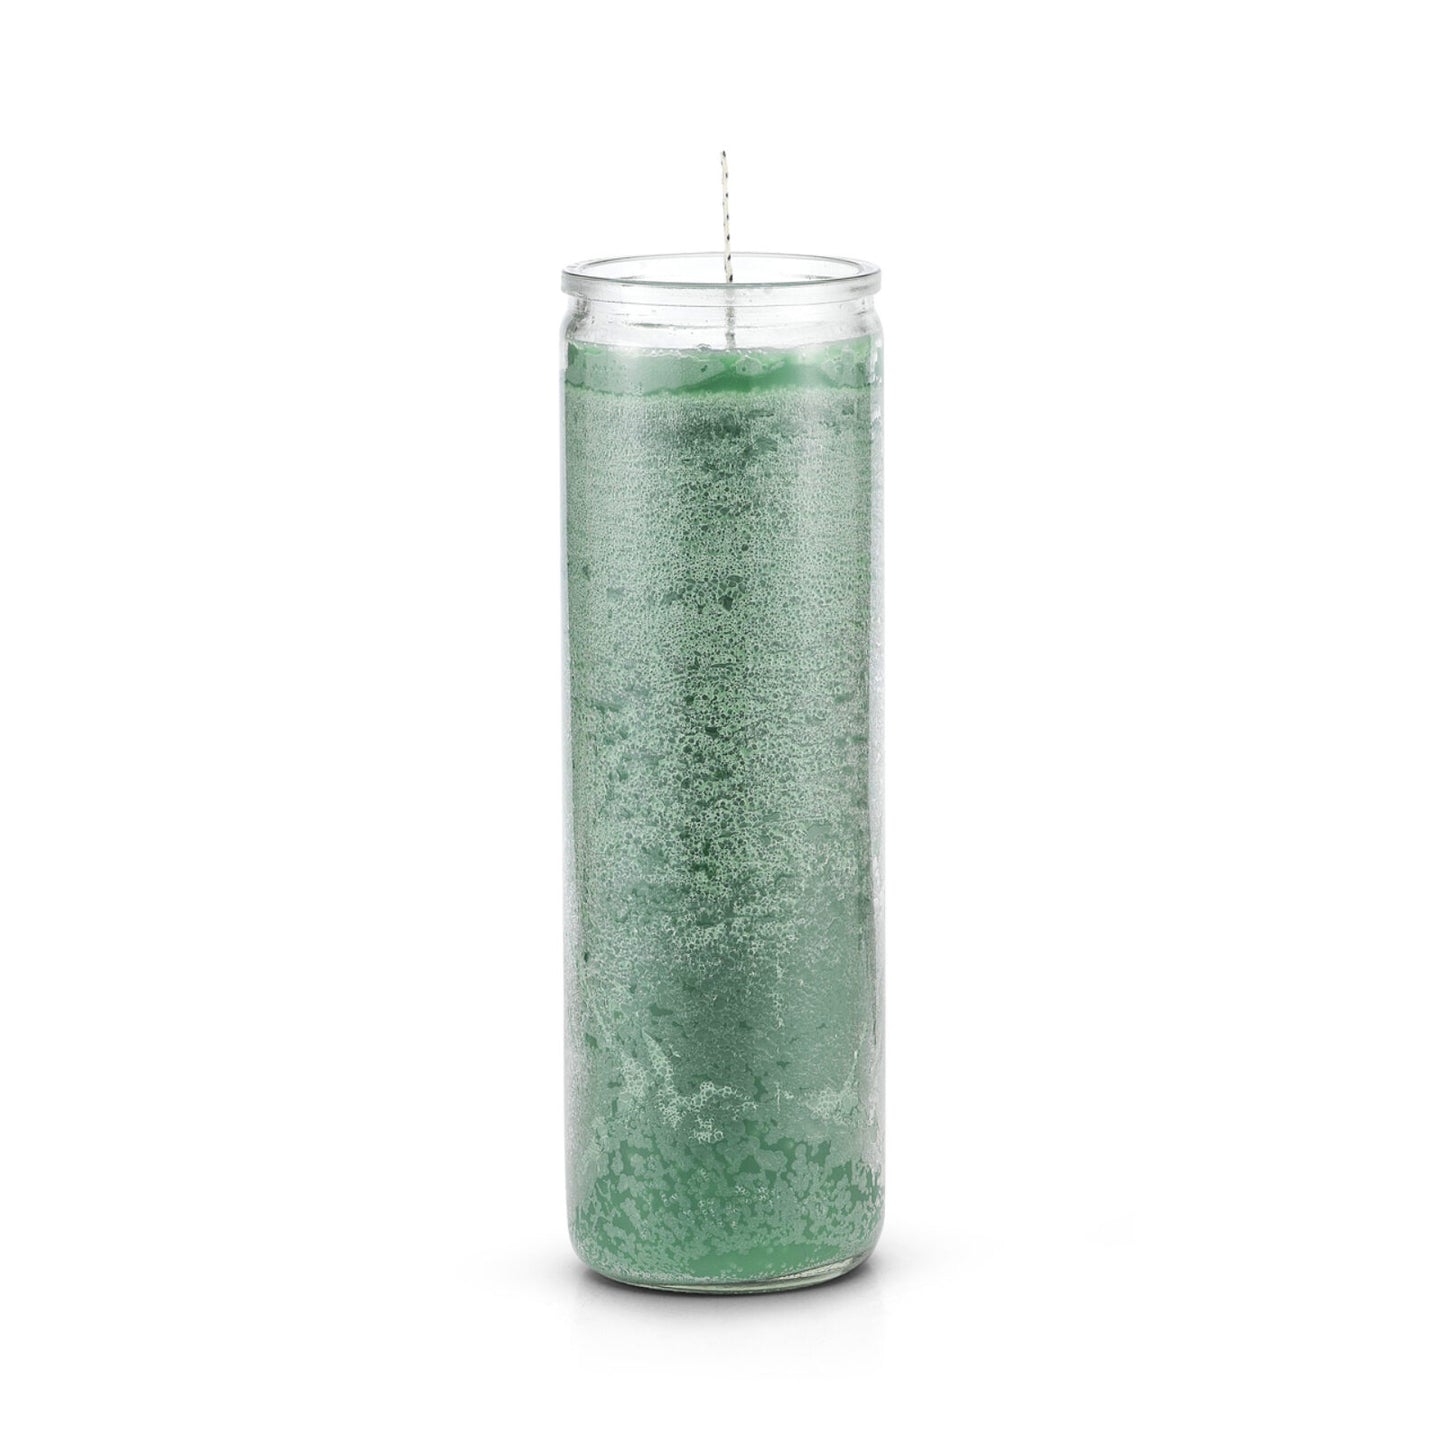 7 Day Jar Candle - Green